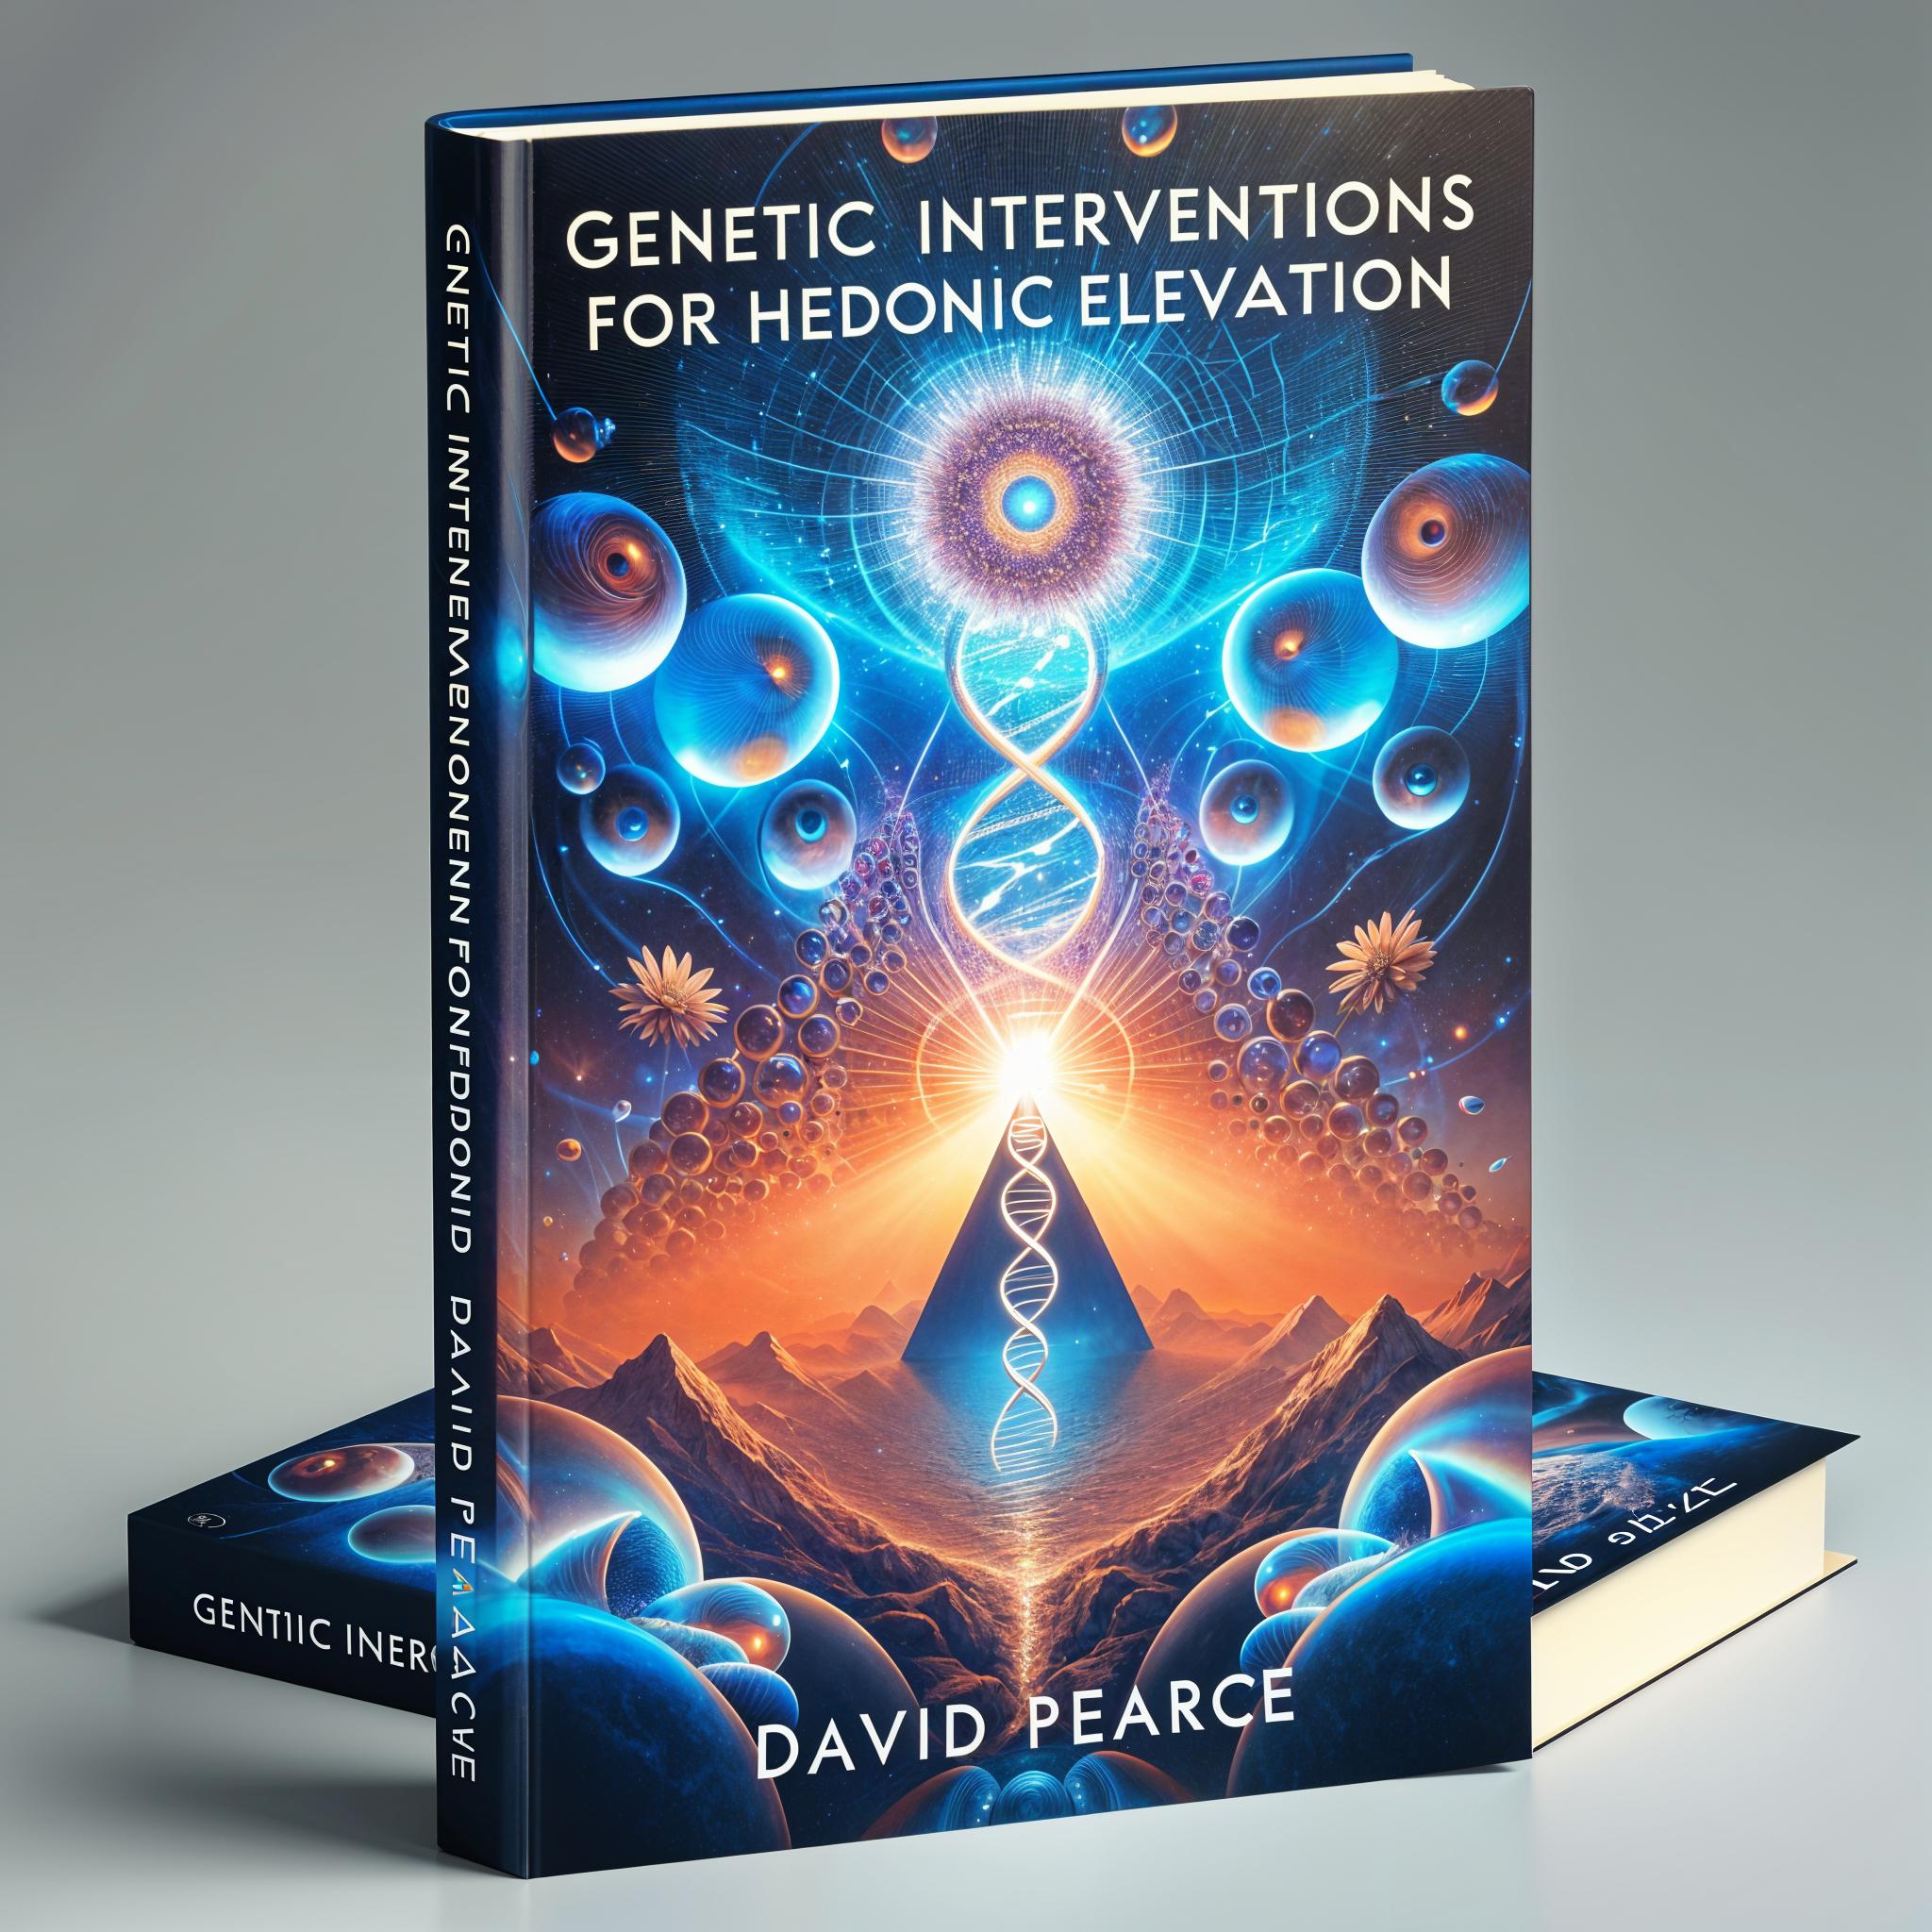 Genetic Interventions for Hedonic Elevation by David Pearce